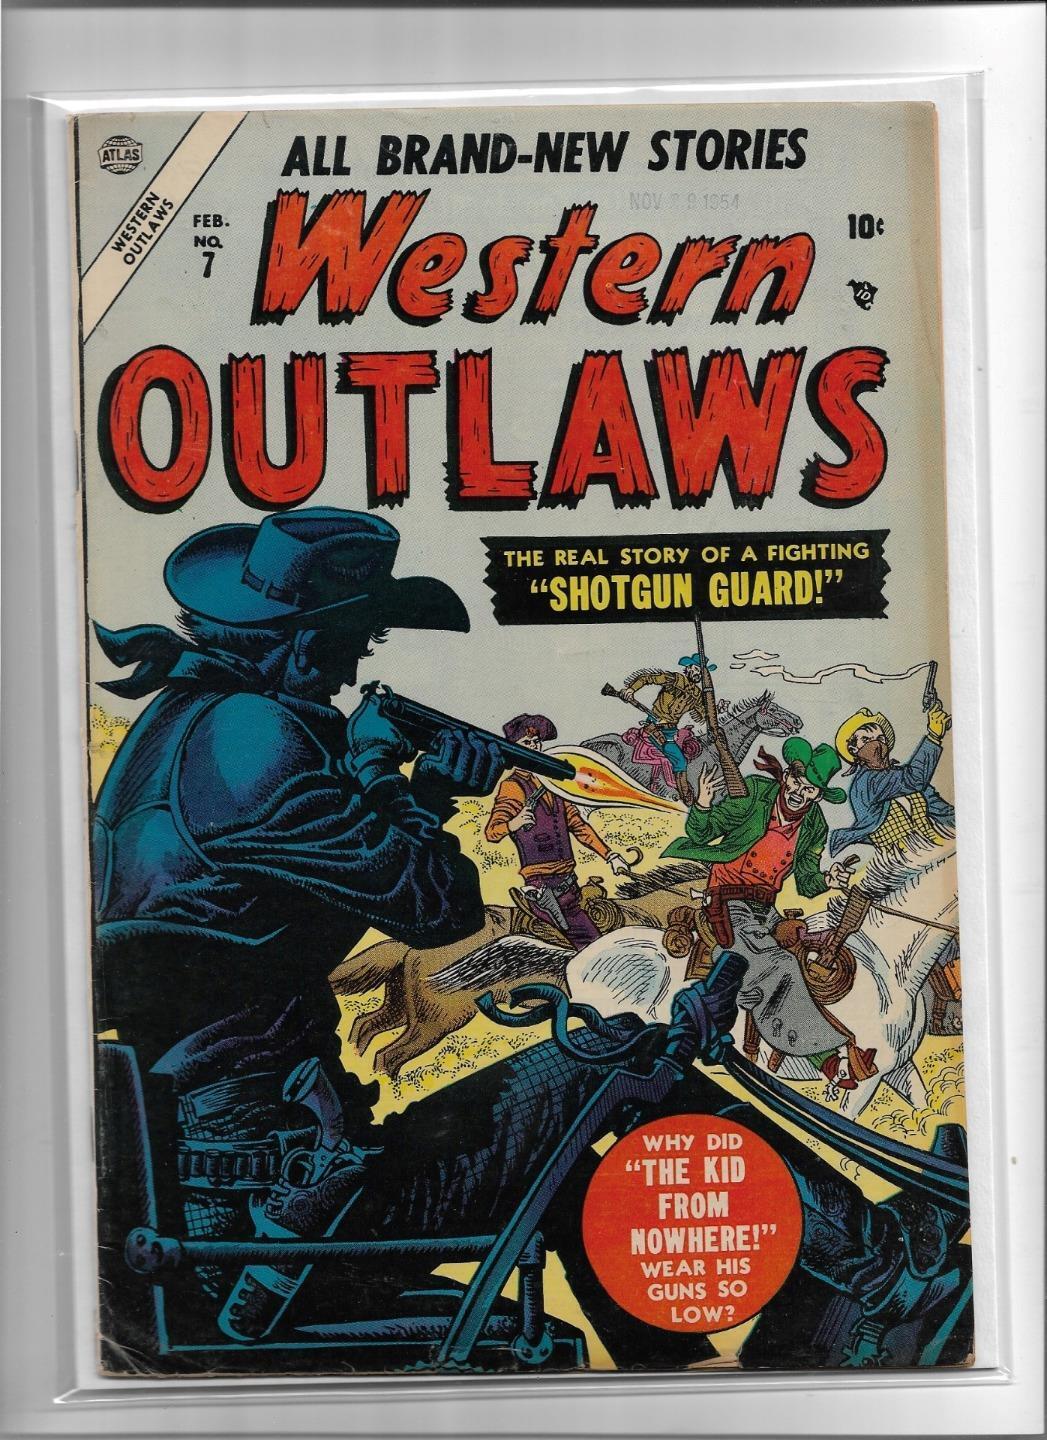 WESTERN OUTLAWS #7 1955 VERY GOOD- 3.5 3490